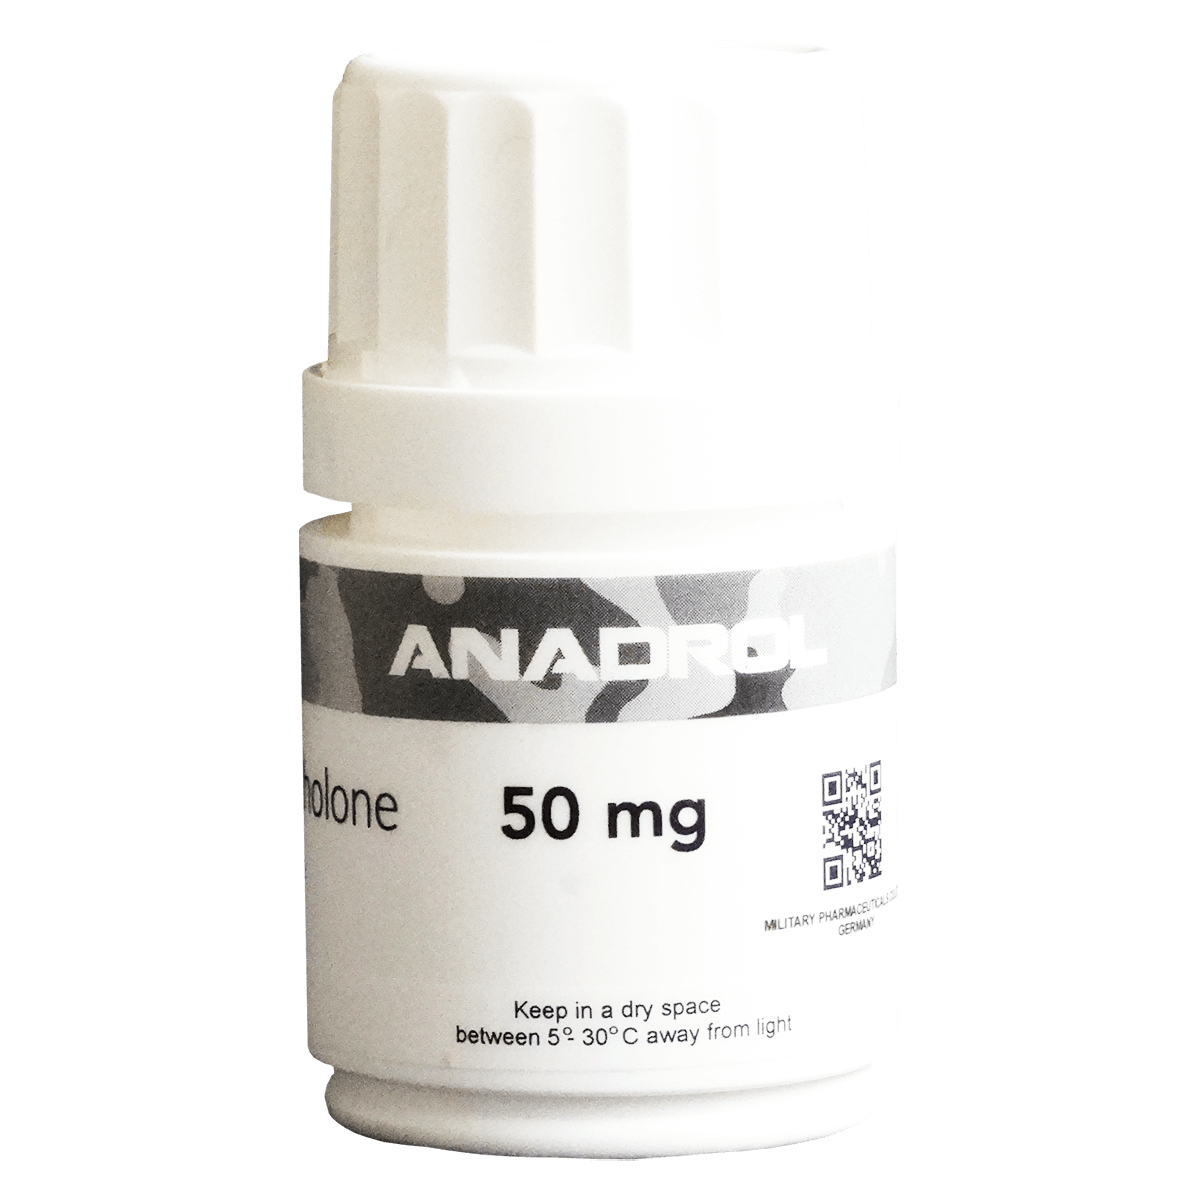 Military-Pharma_Anadrol_50_Oral_Anabolic_Steroid_Androgenic_Mass-Gain_Oxymetholone_oral_Tablets_muscle_hunter-xsf-group